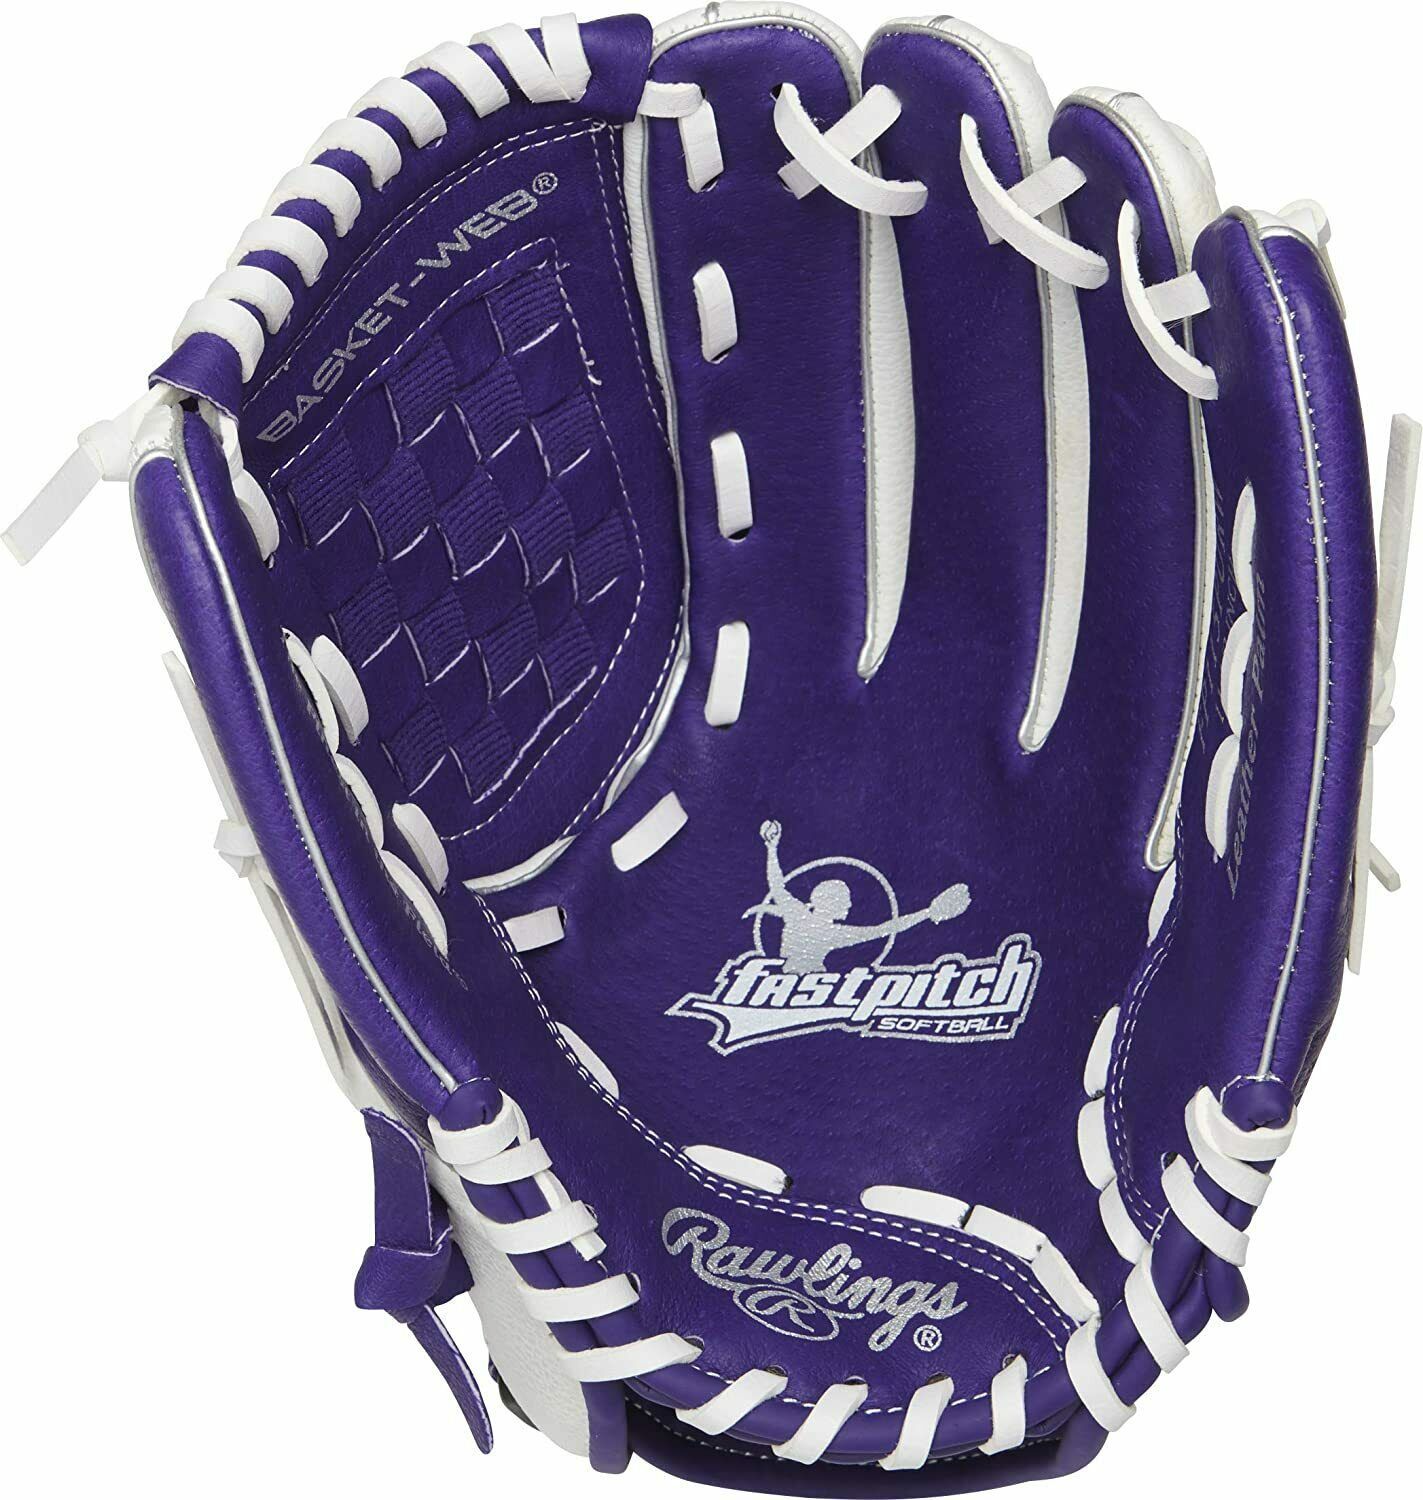 Primary image for Rawlings Playmaker Series  Fastpitch 11.5 Inch Right Hand Throw Glove